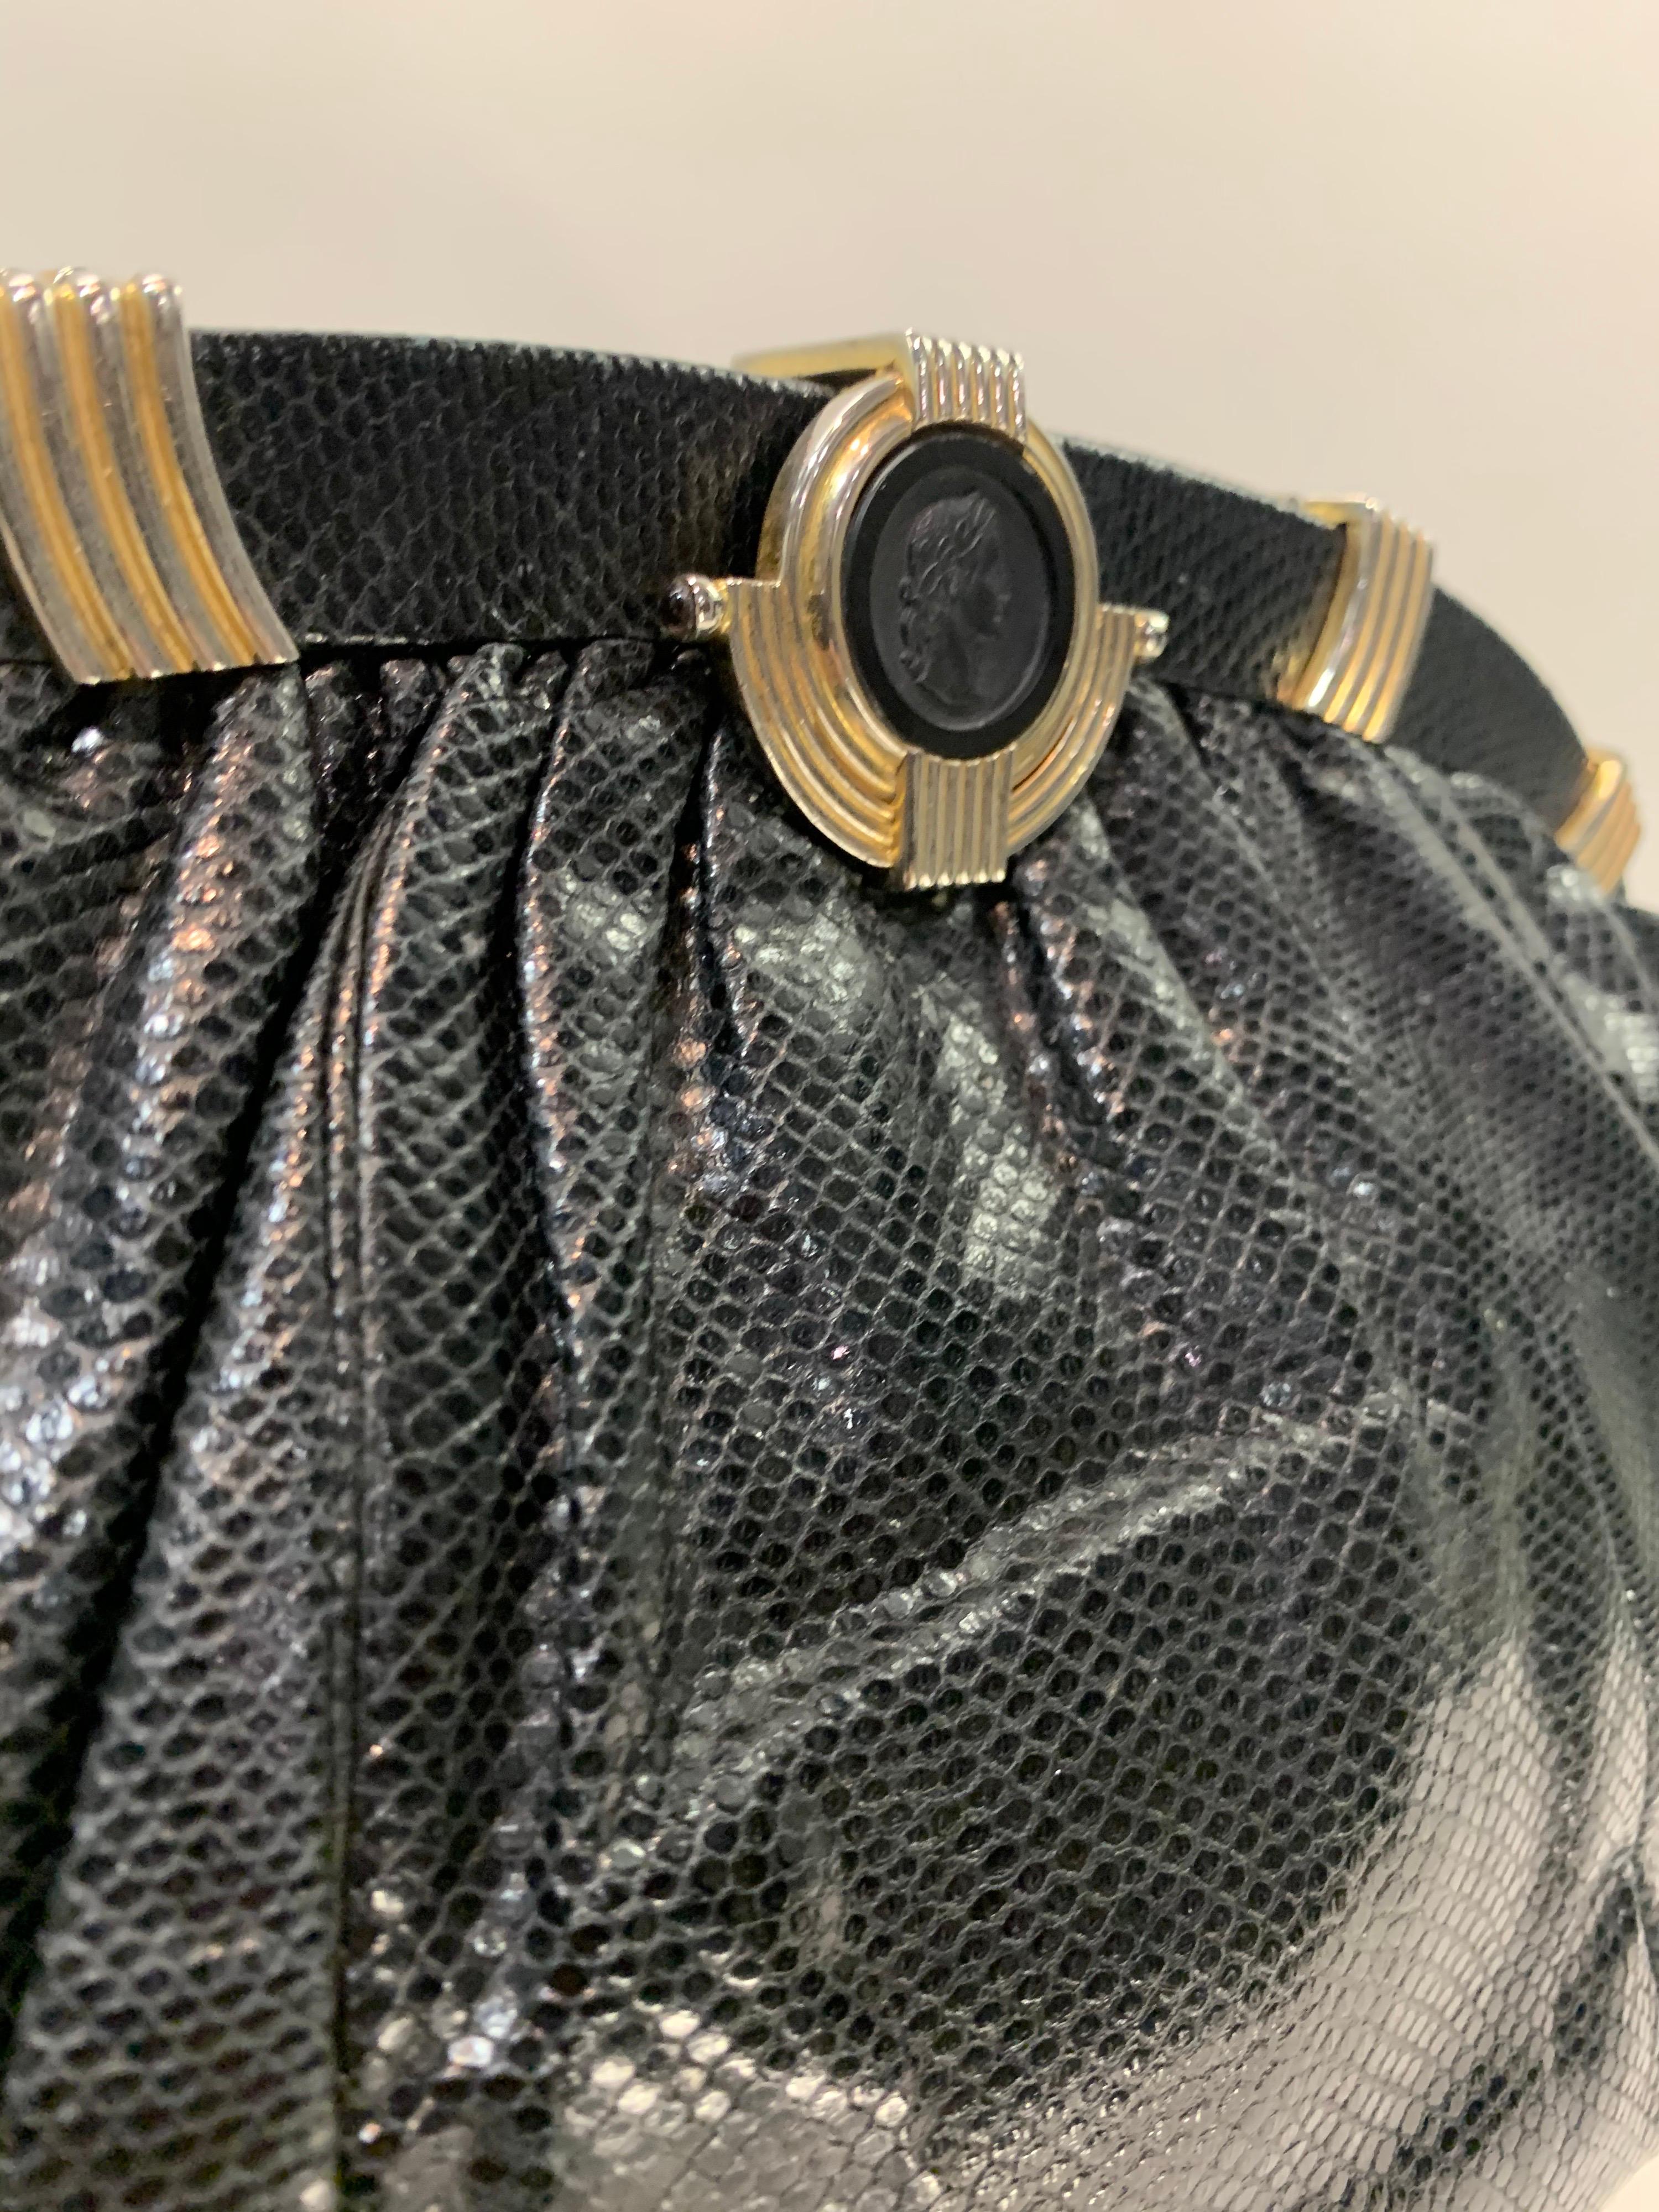 1980s Judith Leiber oval black lizard skin convertible clutch handbag with obsidian cameo clasp. Optional chain handle disappears into bag for clutch. Size Large.